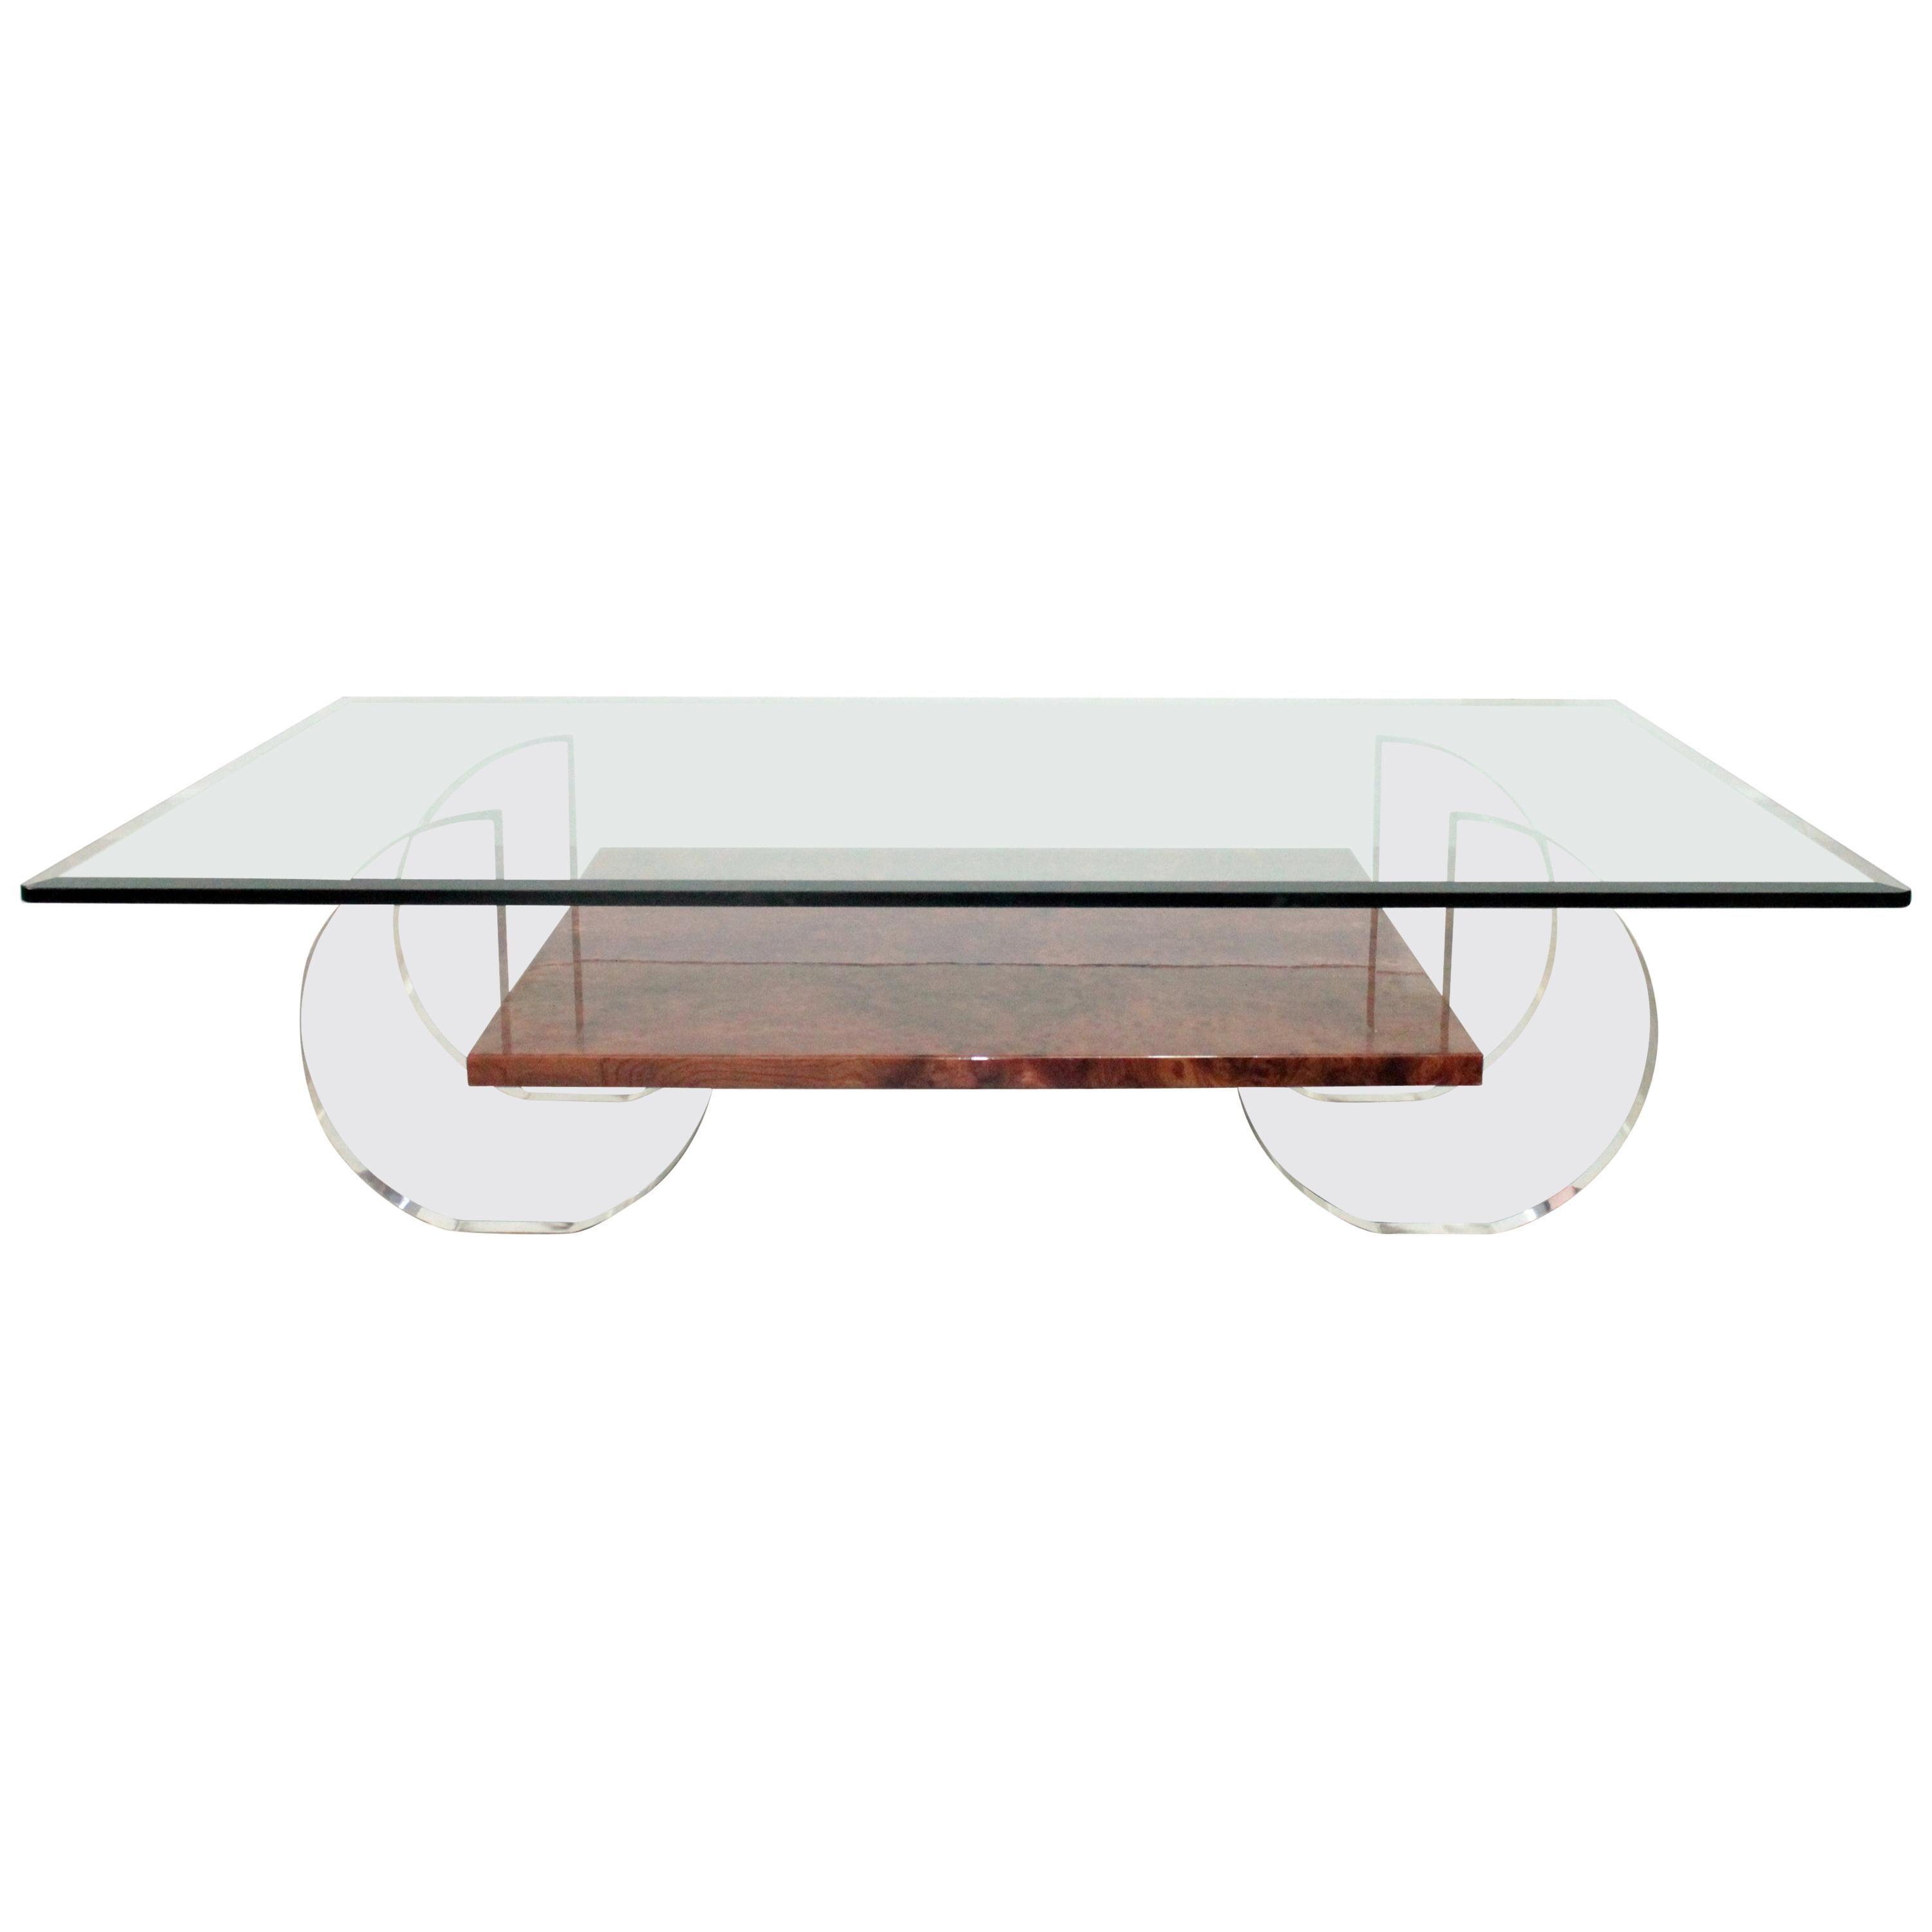 Details about   SUPER COOL 1970'S SPACE AGE MOD TUBULAR CHROME DESK W ROSEWOOD TOP